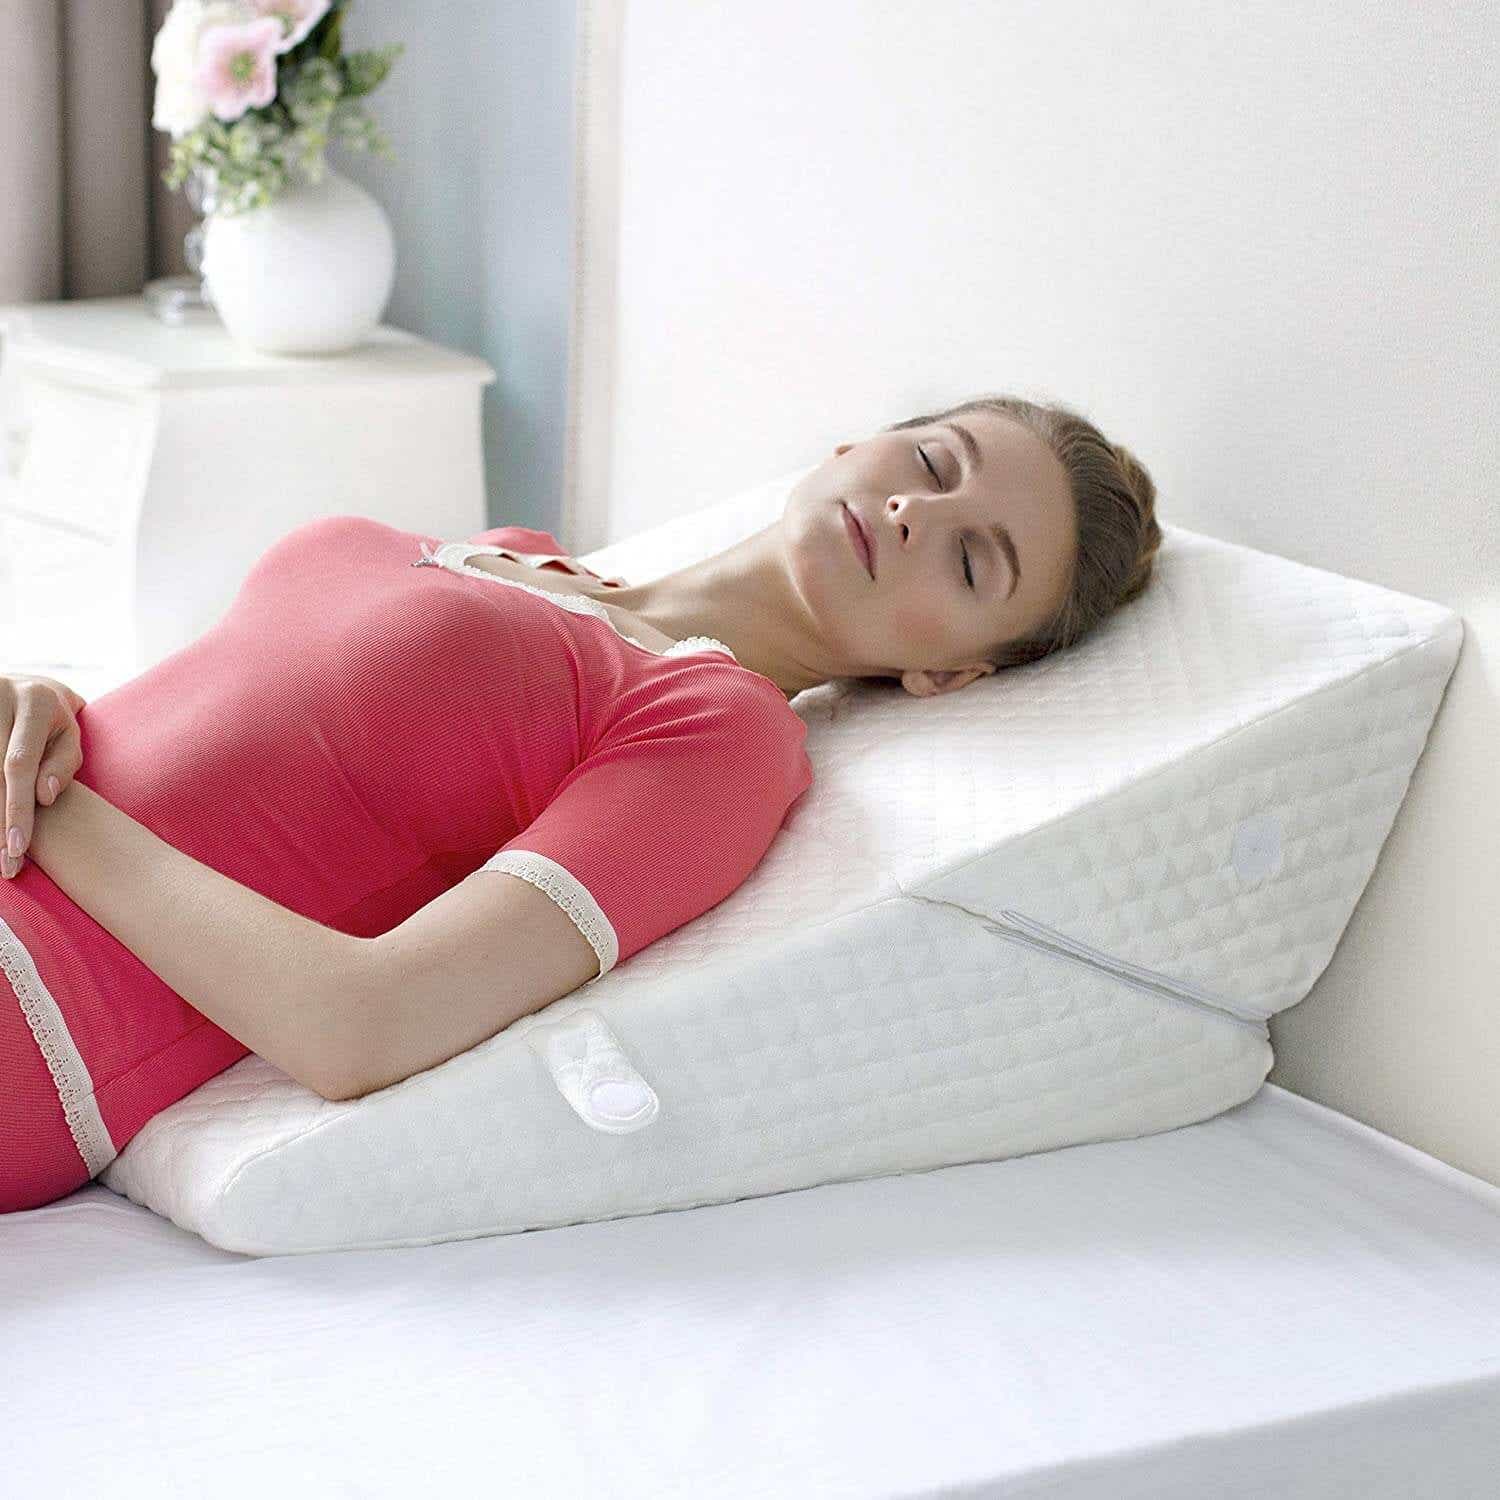 woman in pink top laying on wedge pillow